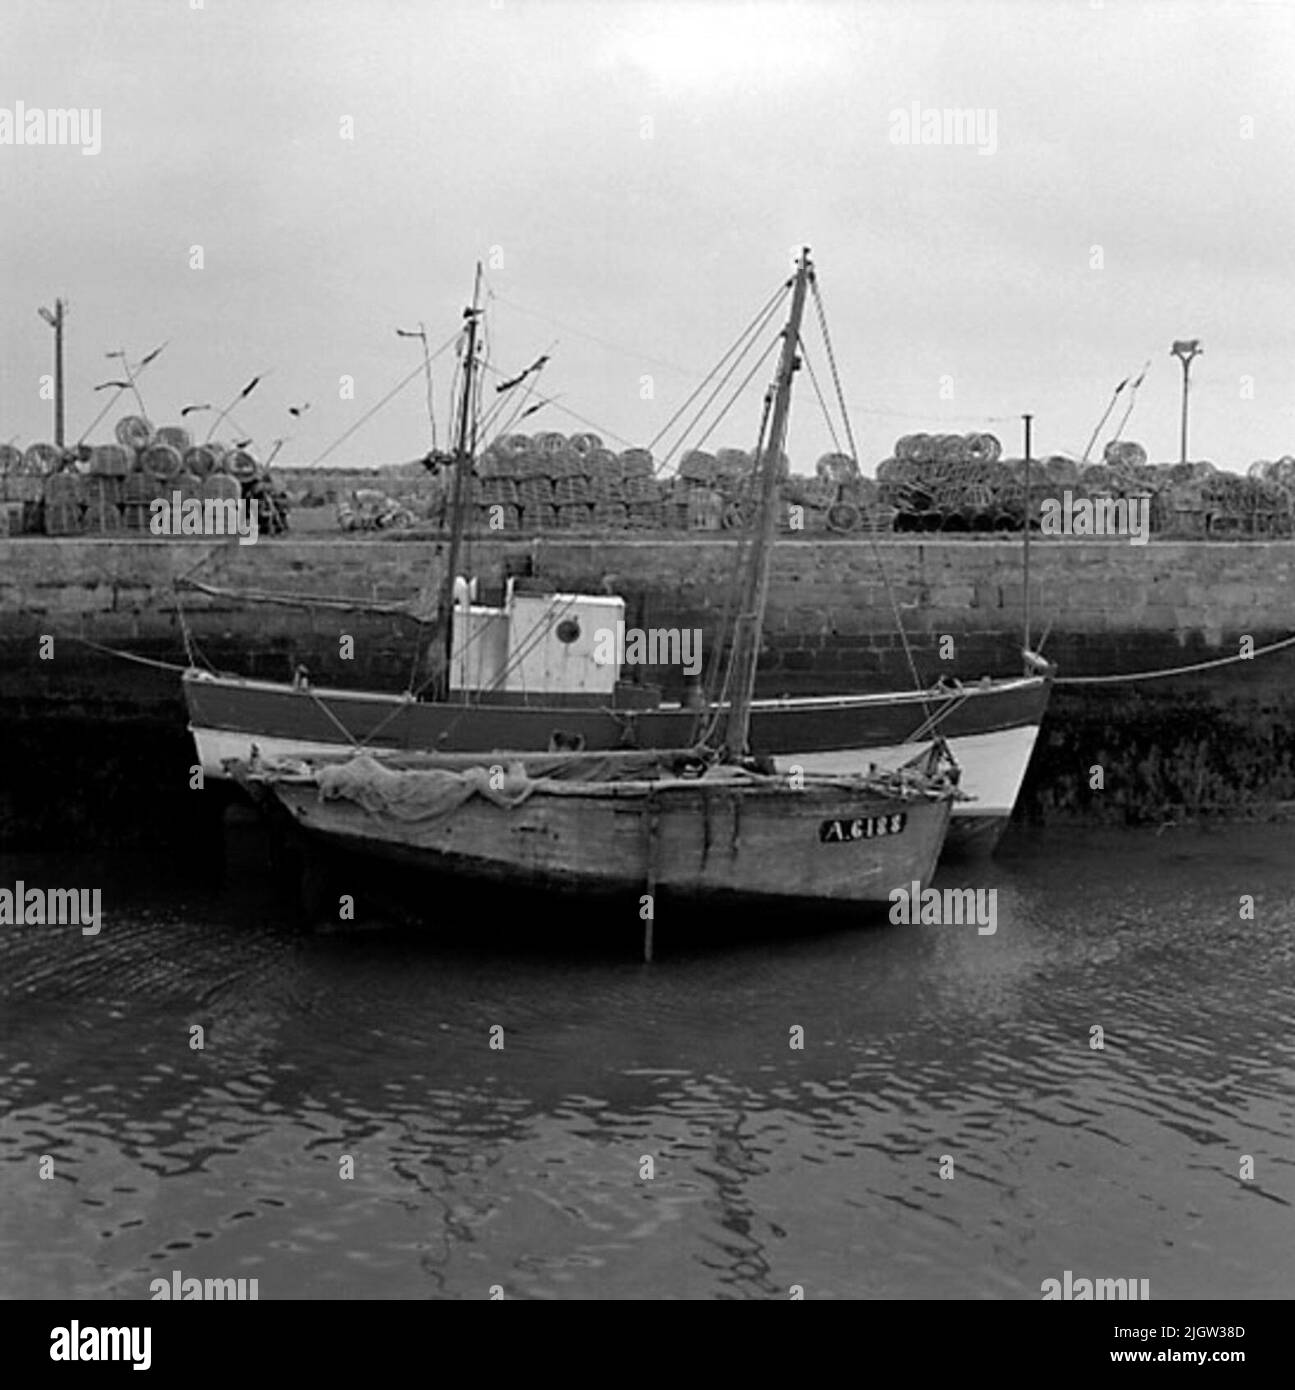 7. France. Photo journal is available at B.M.A. + Photo albums. Acquisition: Books and archive materials. Photos taken 1959-10-16.12 Pictures in series. According to notes: France. Atlantic coast, Le Croisic, 17/10 -59. Fishing boats in the harbor channel under EBB. In the background Hummertinor.två fishing boat is located in a harbor. It is low tide so the boats are partly on the bottom. On the quay there are cages for fishing. Stock Photo